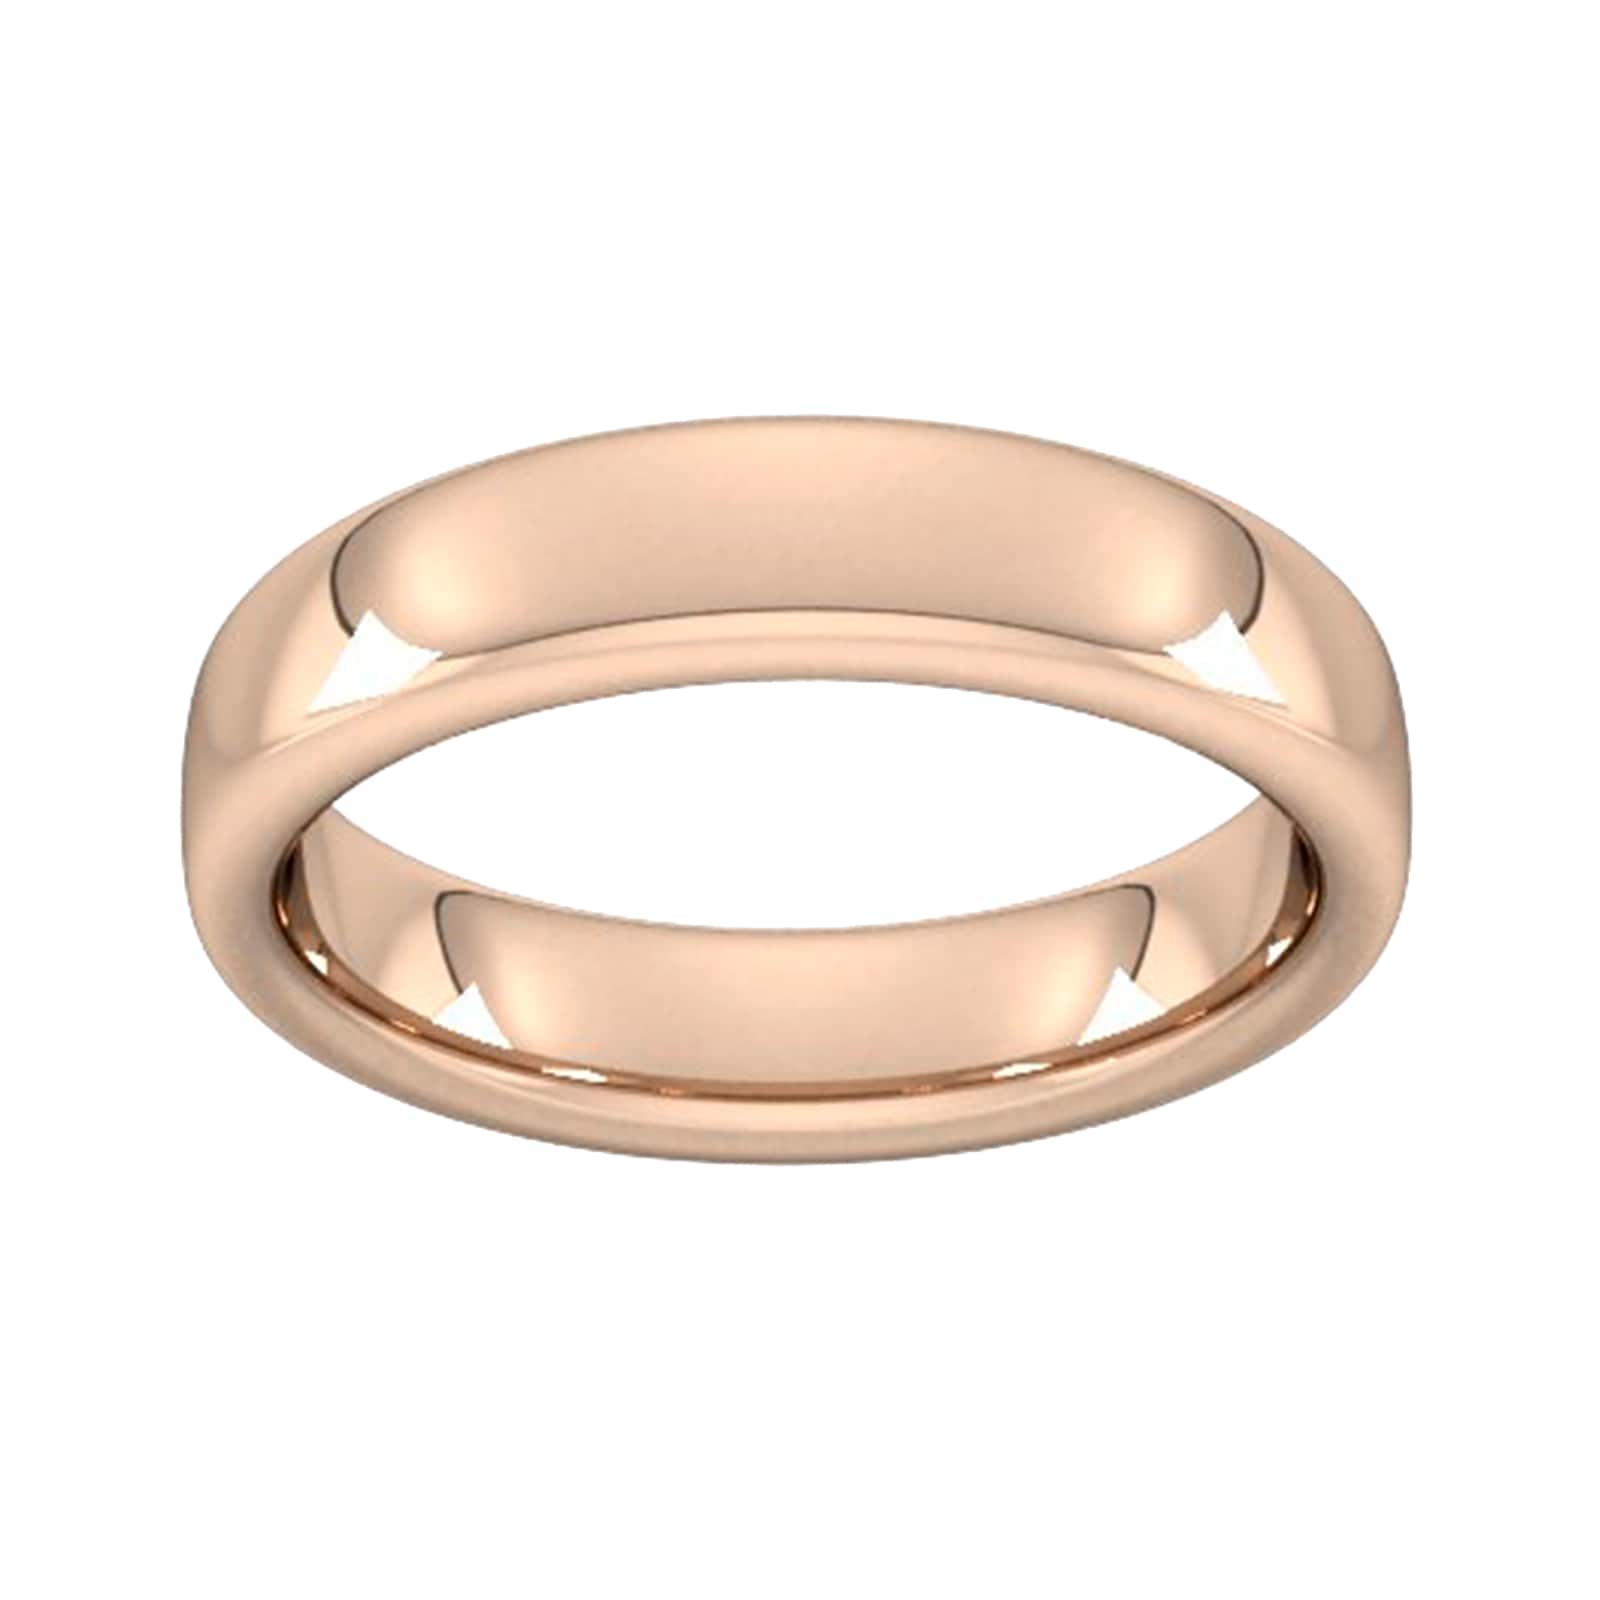 5mm Slight Court Extra Heavy Wedding Ring In 18 Carat Rose Gold - Ring Size S